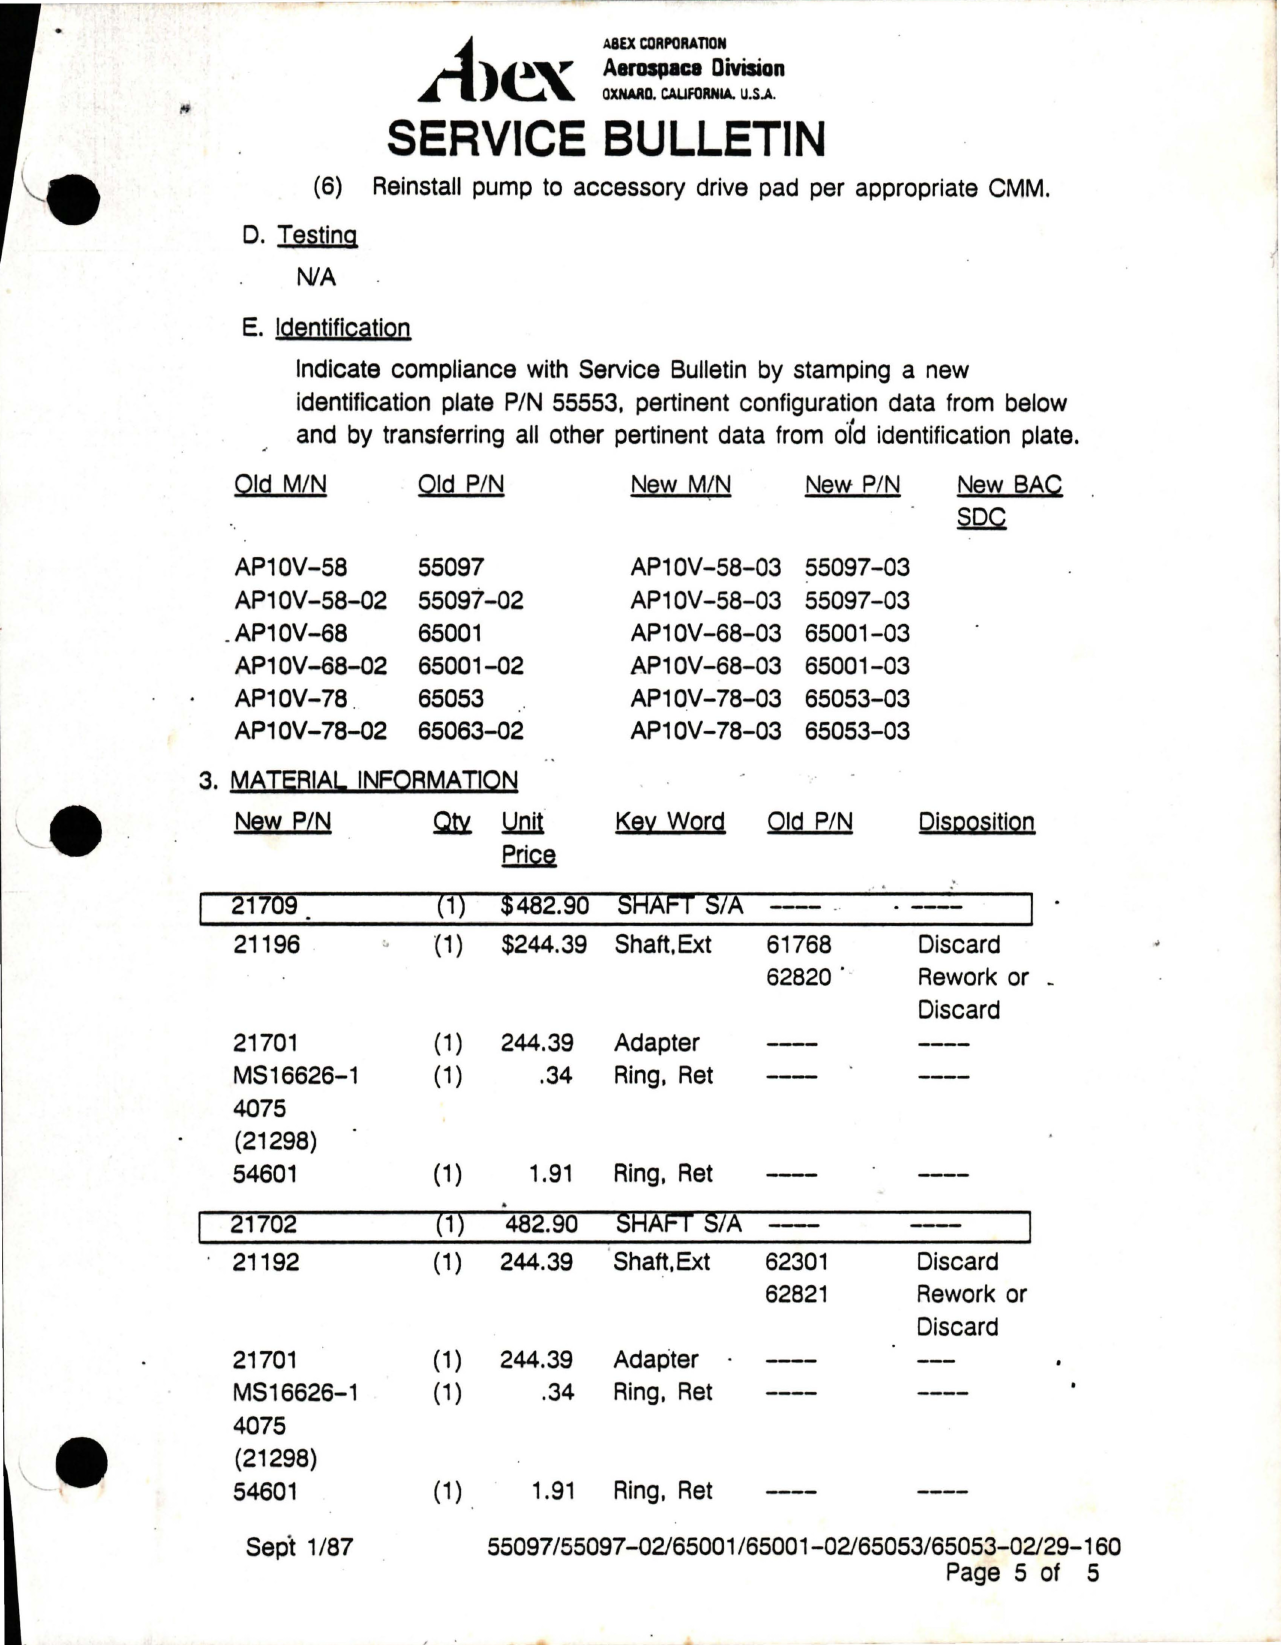 Sample page 5 from AirCorps Library document: Installation of New Shaft S/A w Non Metallic Adapter for Hydraulic Pump